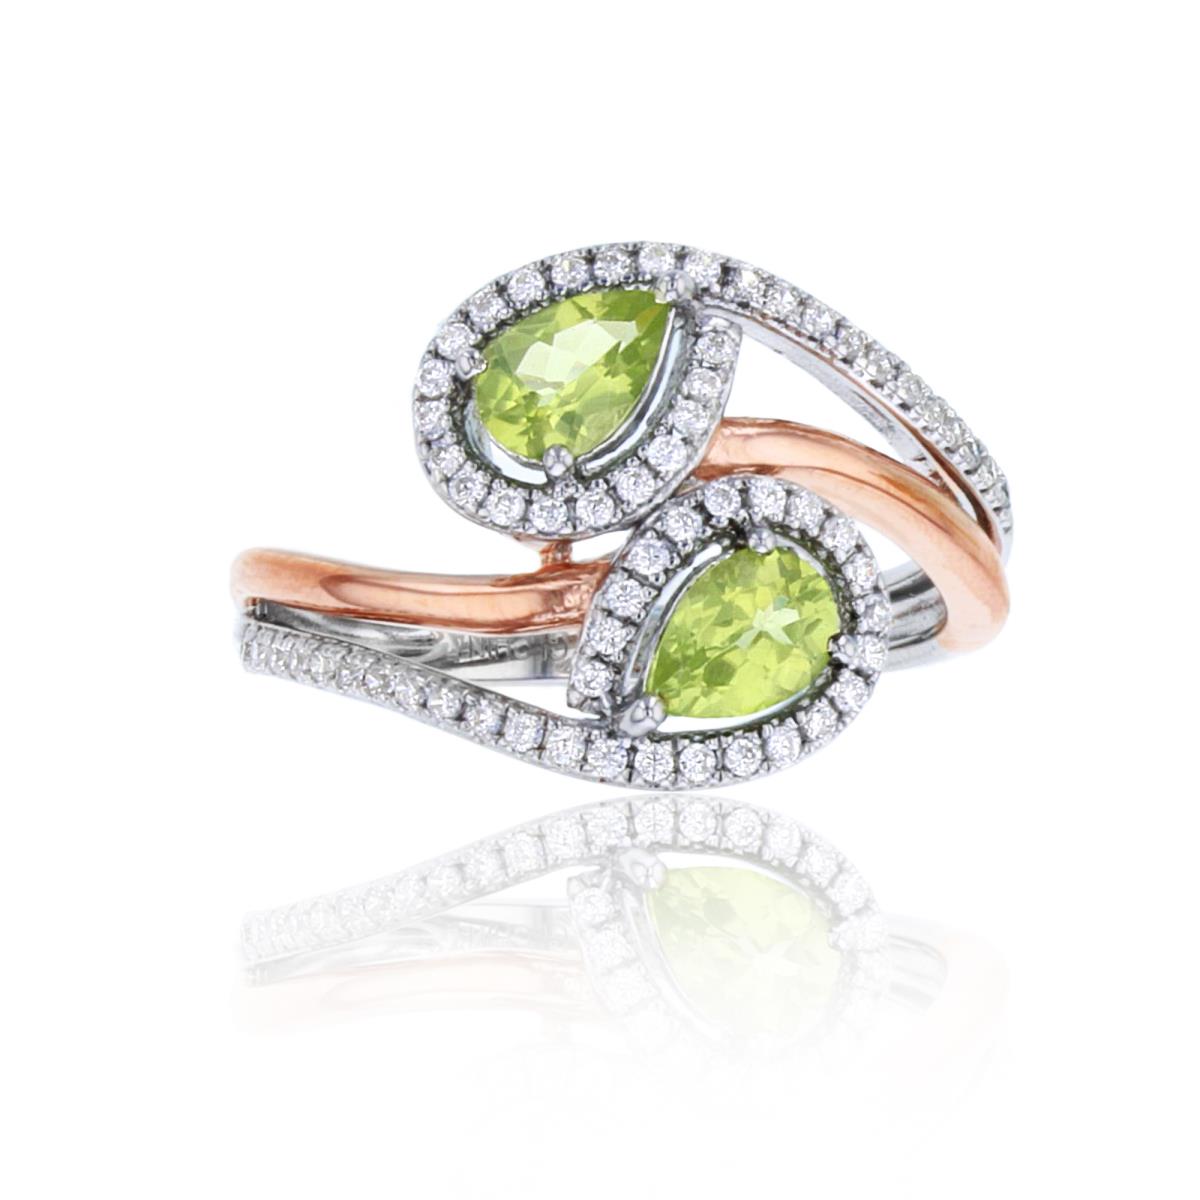 Sterling Silver+1Micron 14K Rose Gold 0.31cttw Rnd Diam & 6x4mm PS Peridot Bypass Halo Ring